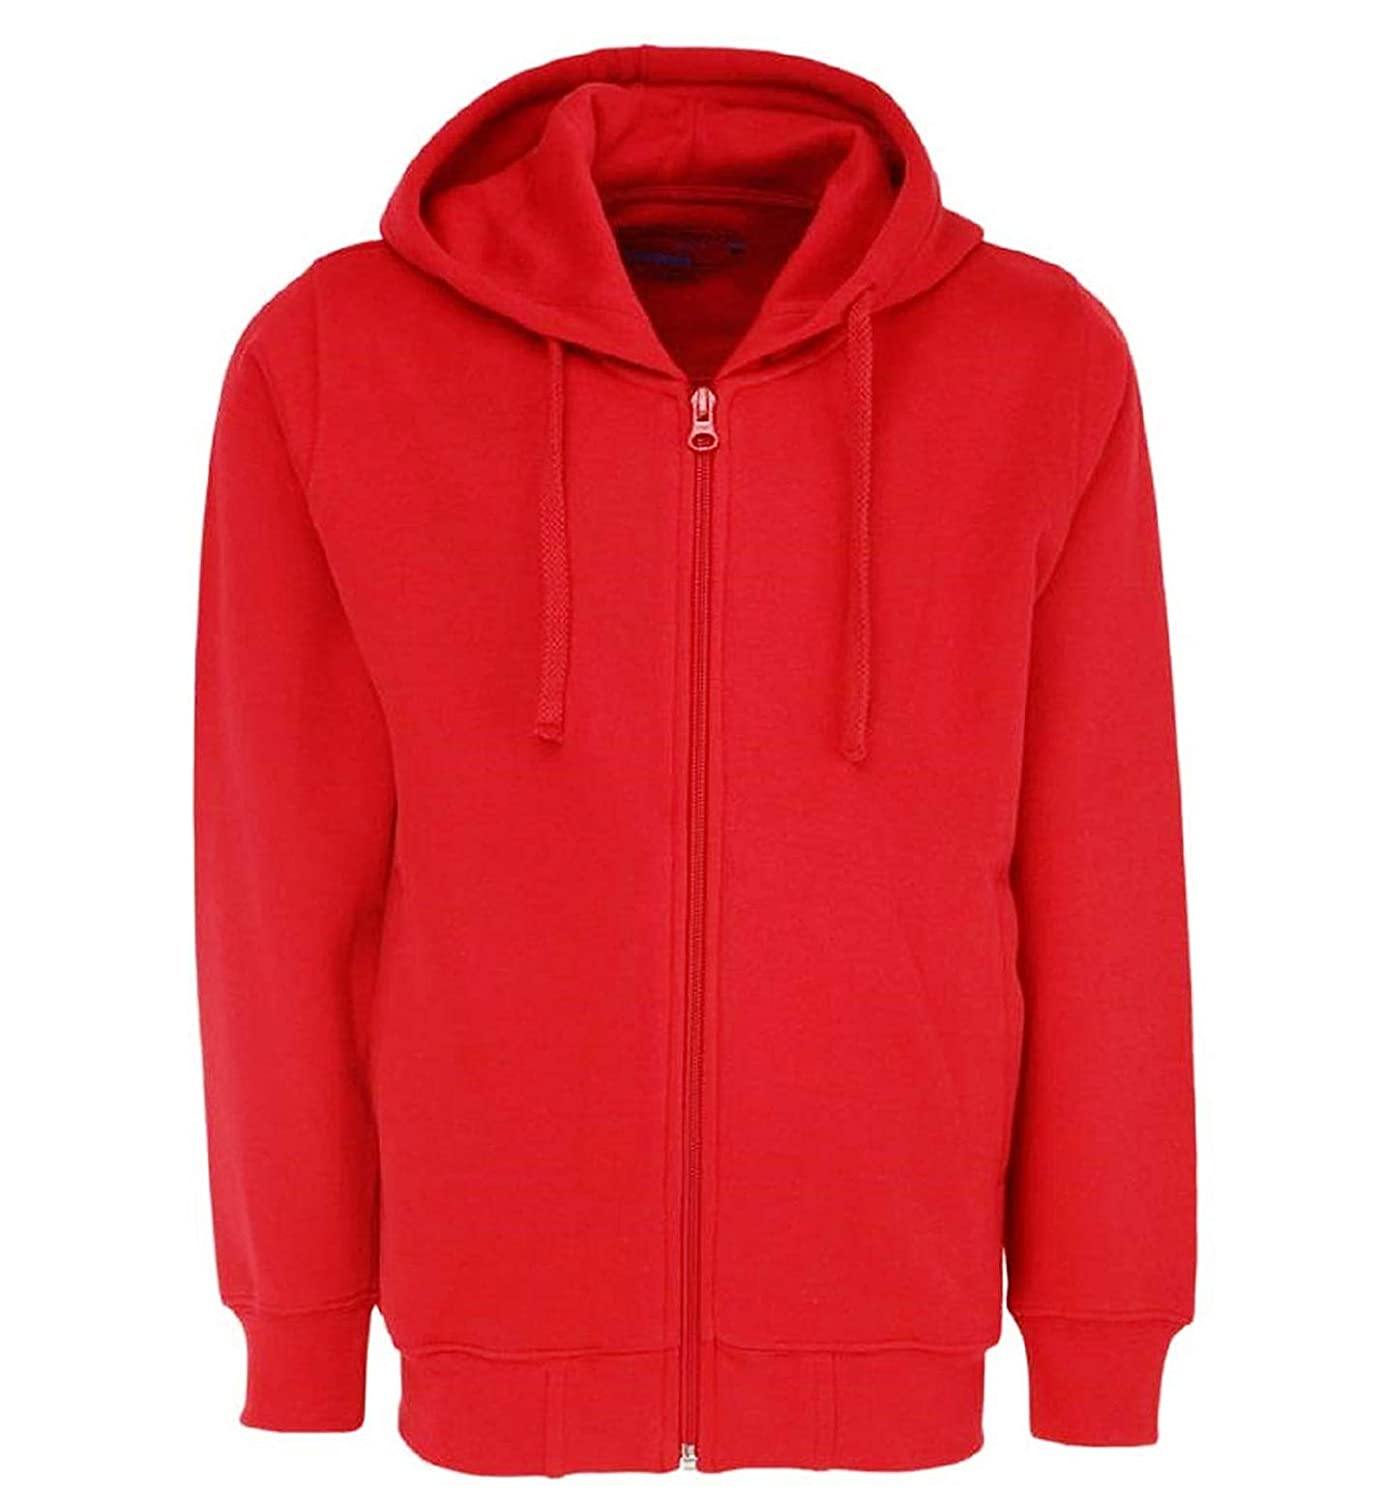 Prokick Kid's Rich Cotton Full Sleeves Zipper Jacket with Hoodies for Girls and Boys Red - Best Price online Prokicksports.com